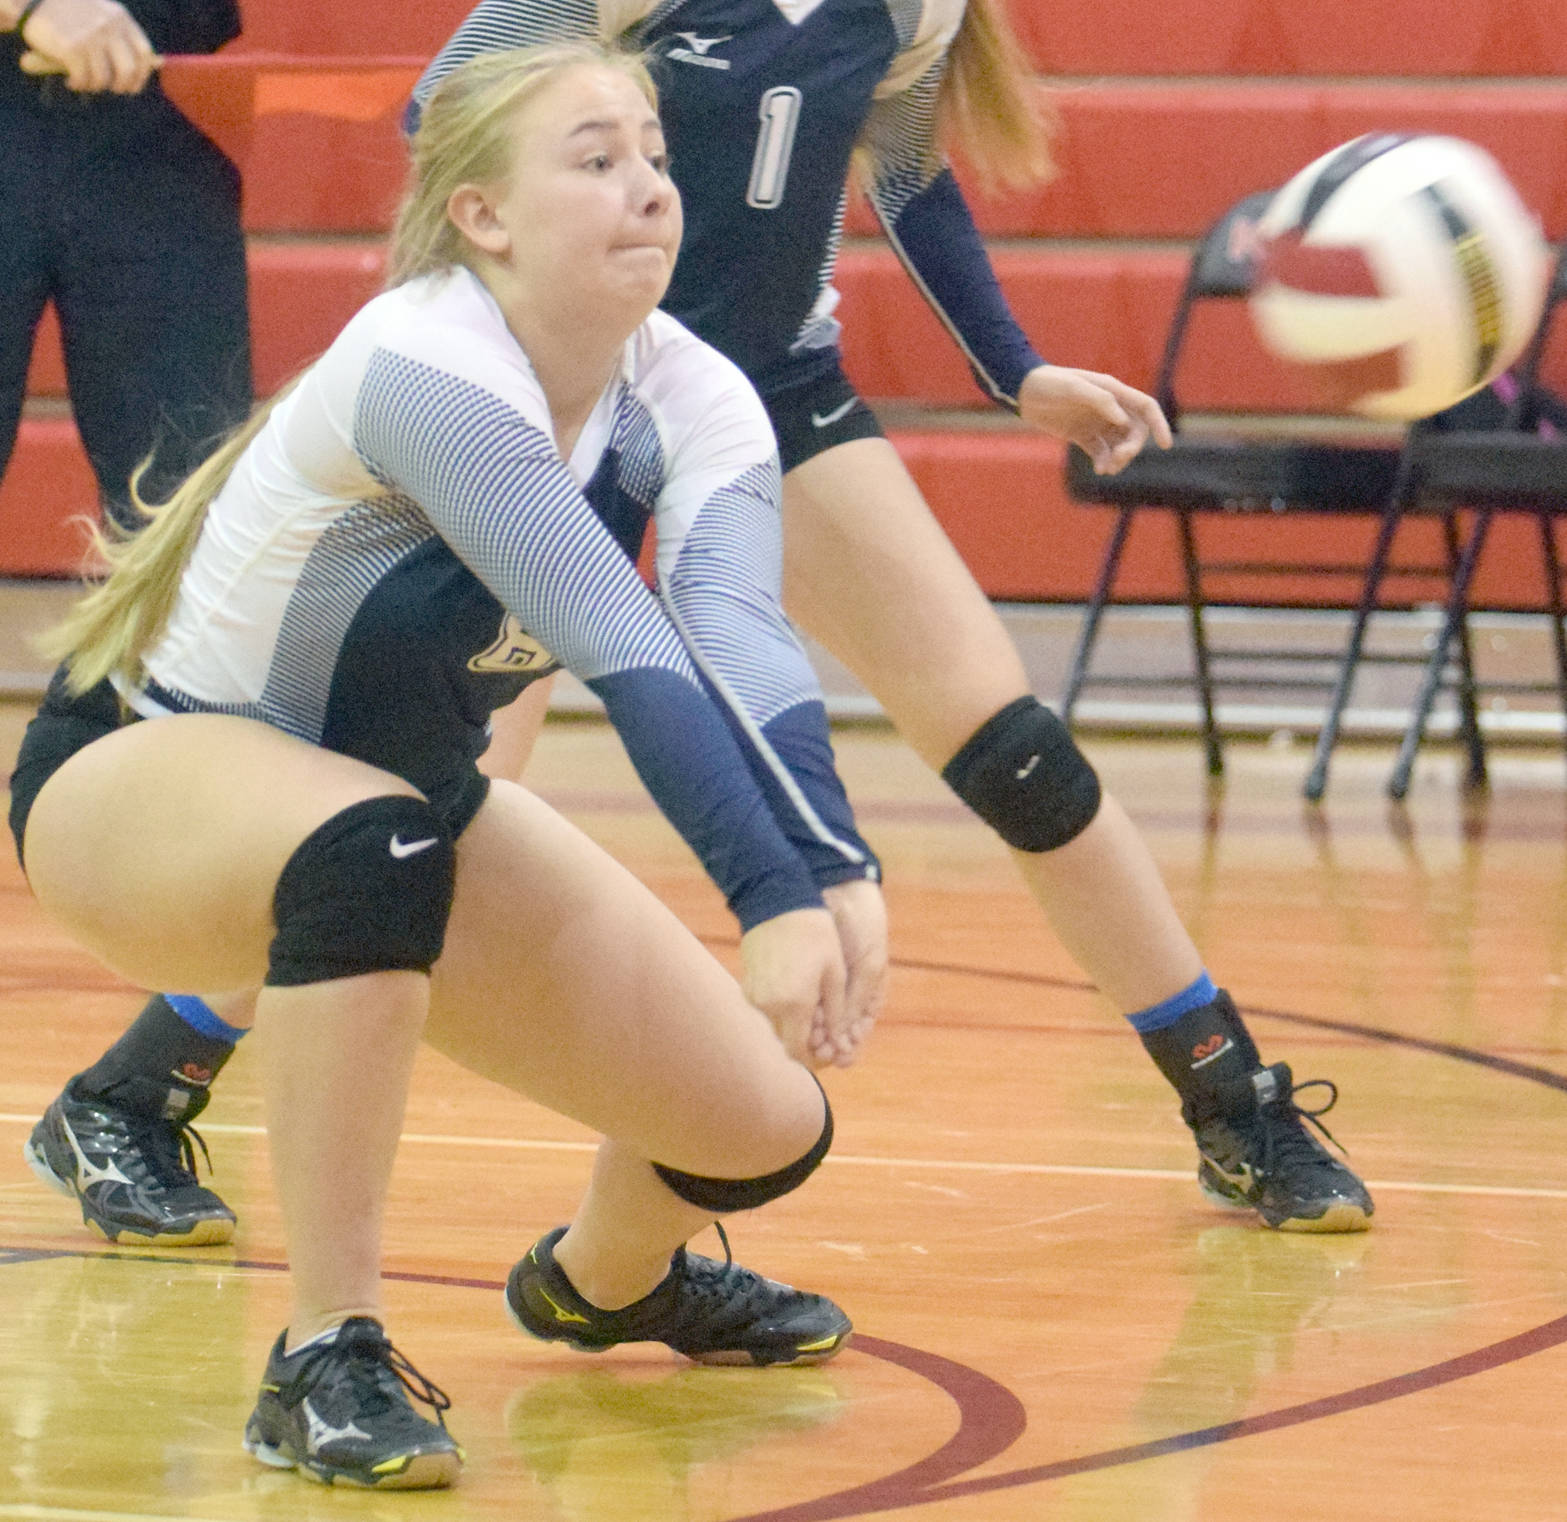 Brittani Blossom digs up a ball for Soldotna on Friday, Sept. 29, 2017, at Kenai Central High School. (Photo by Jeff Helminiak/Peninsula Clarion)